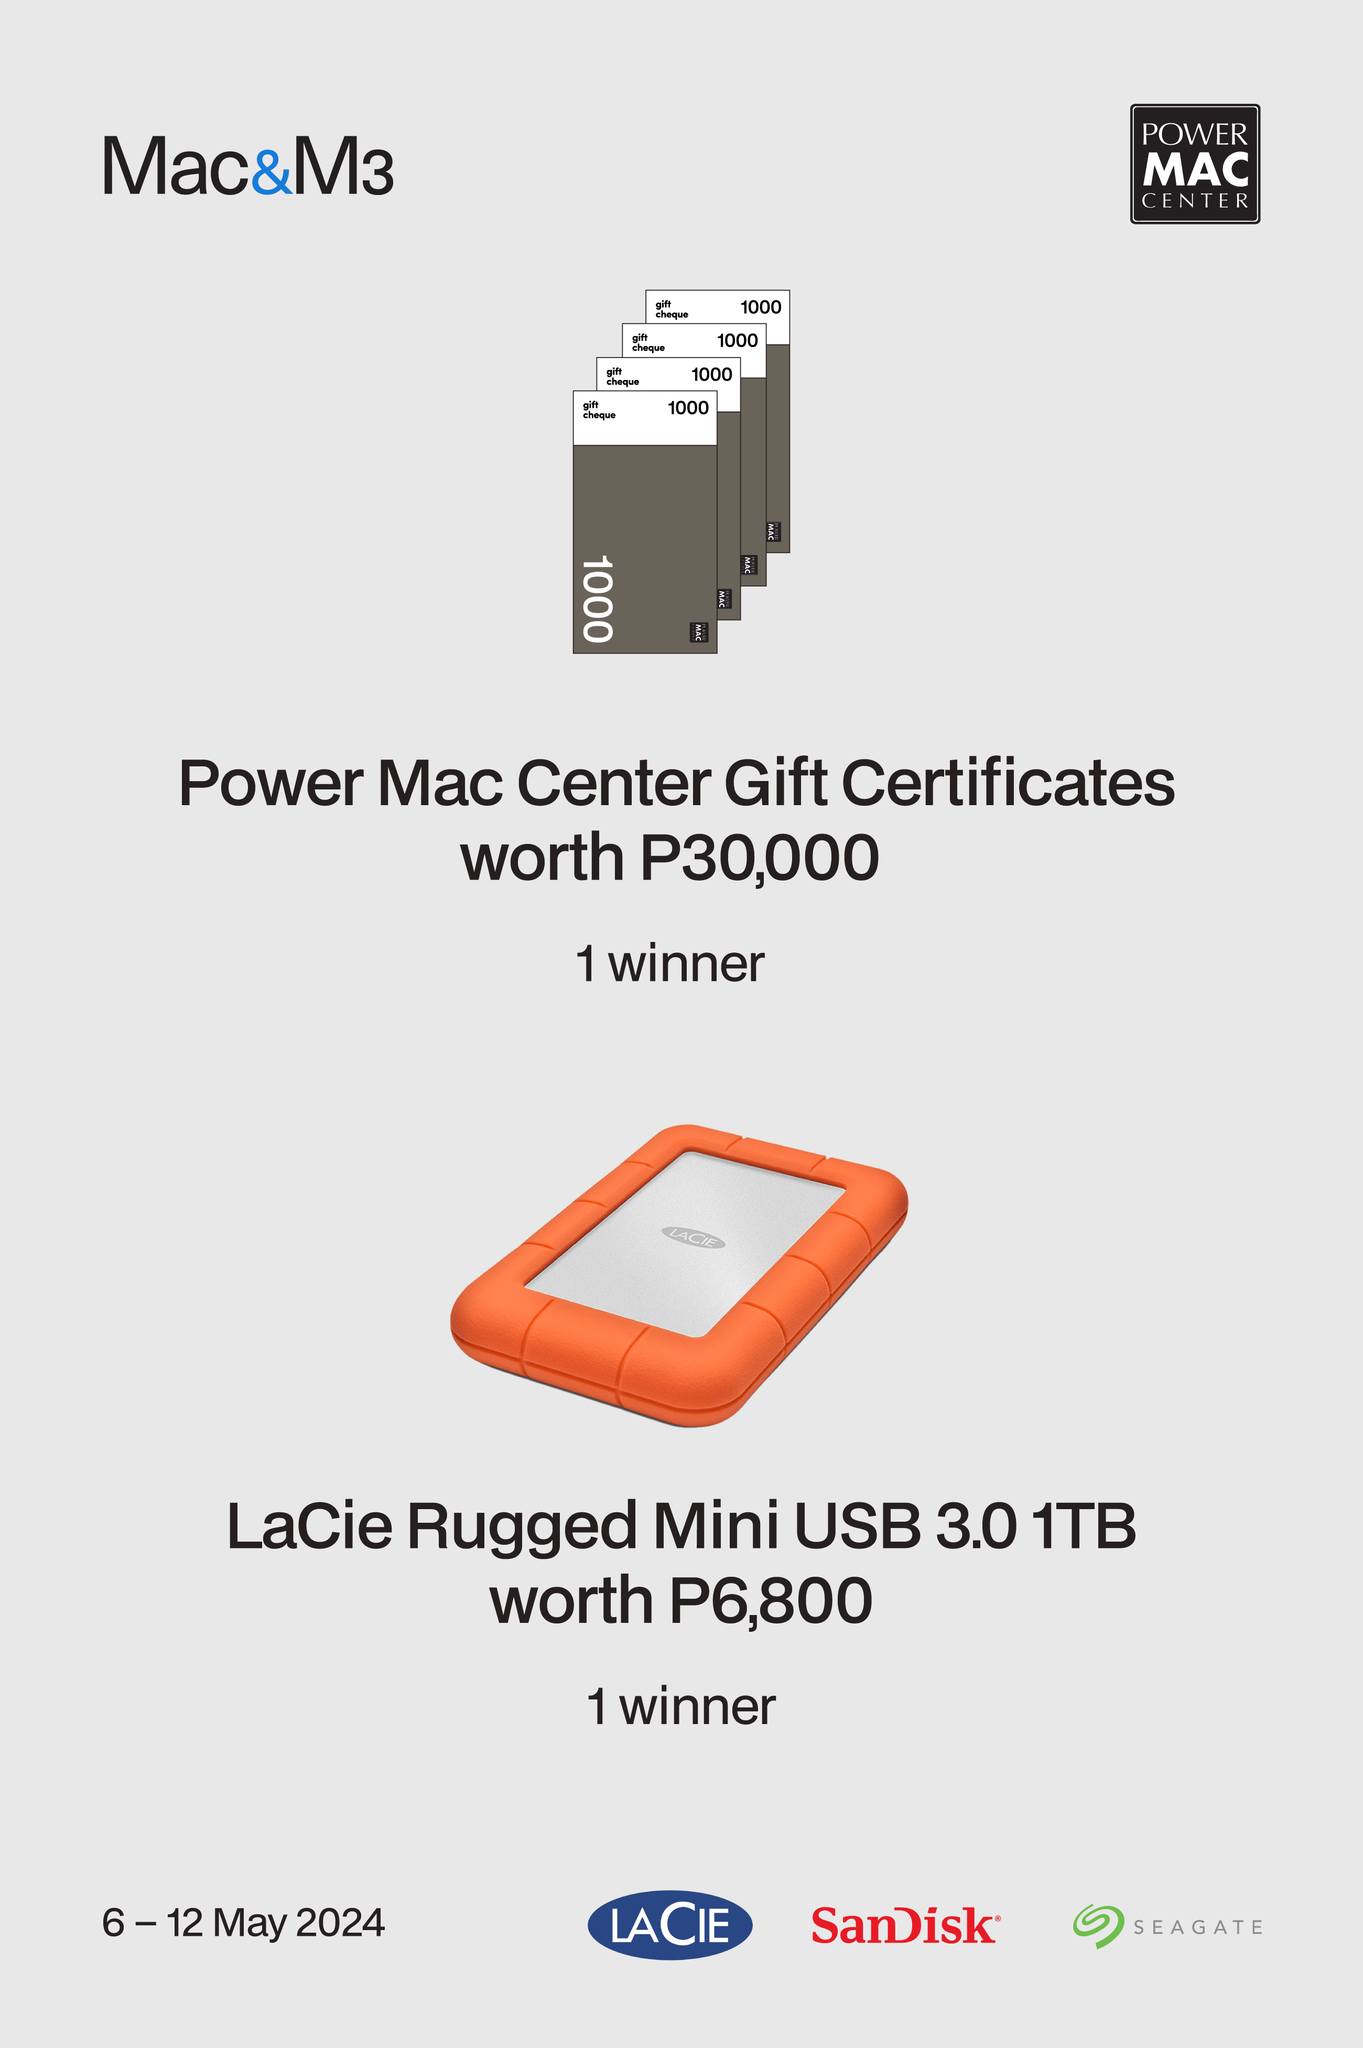 MacBook Air M3, now available in select Power Mac Center and The Loop nationwide